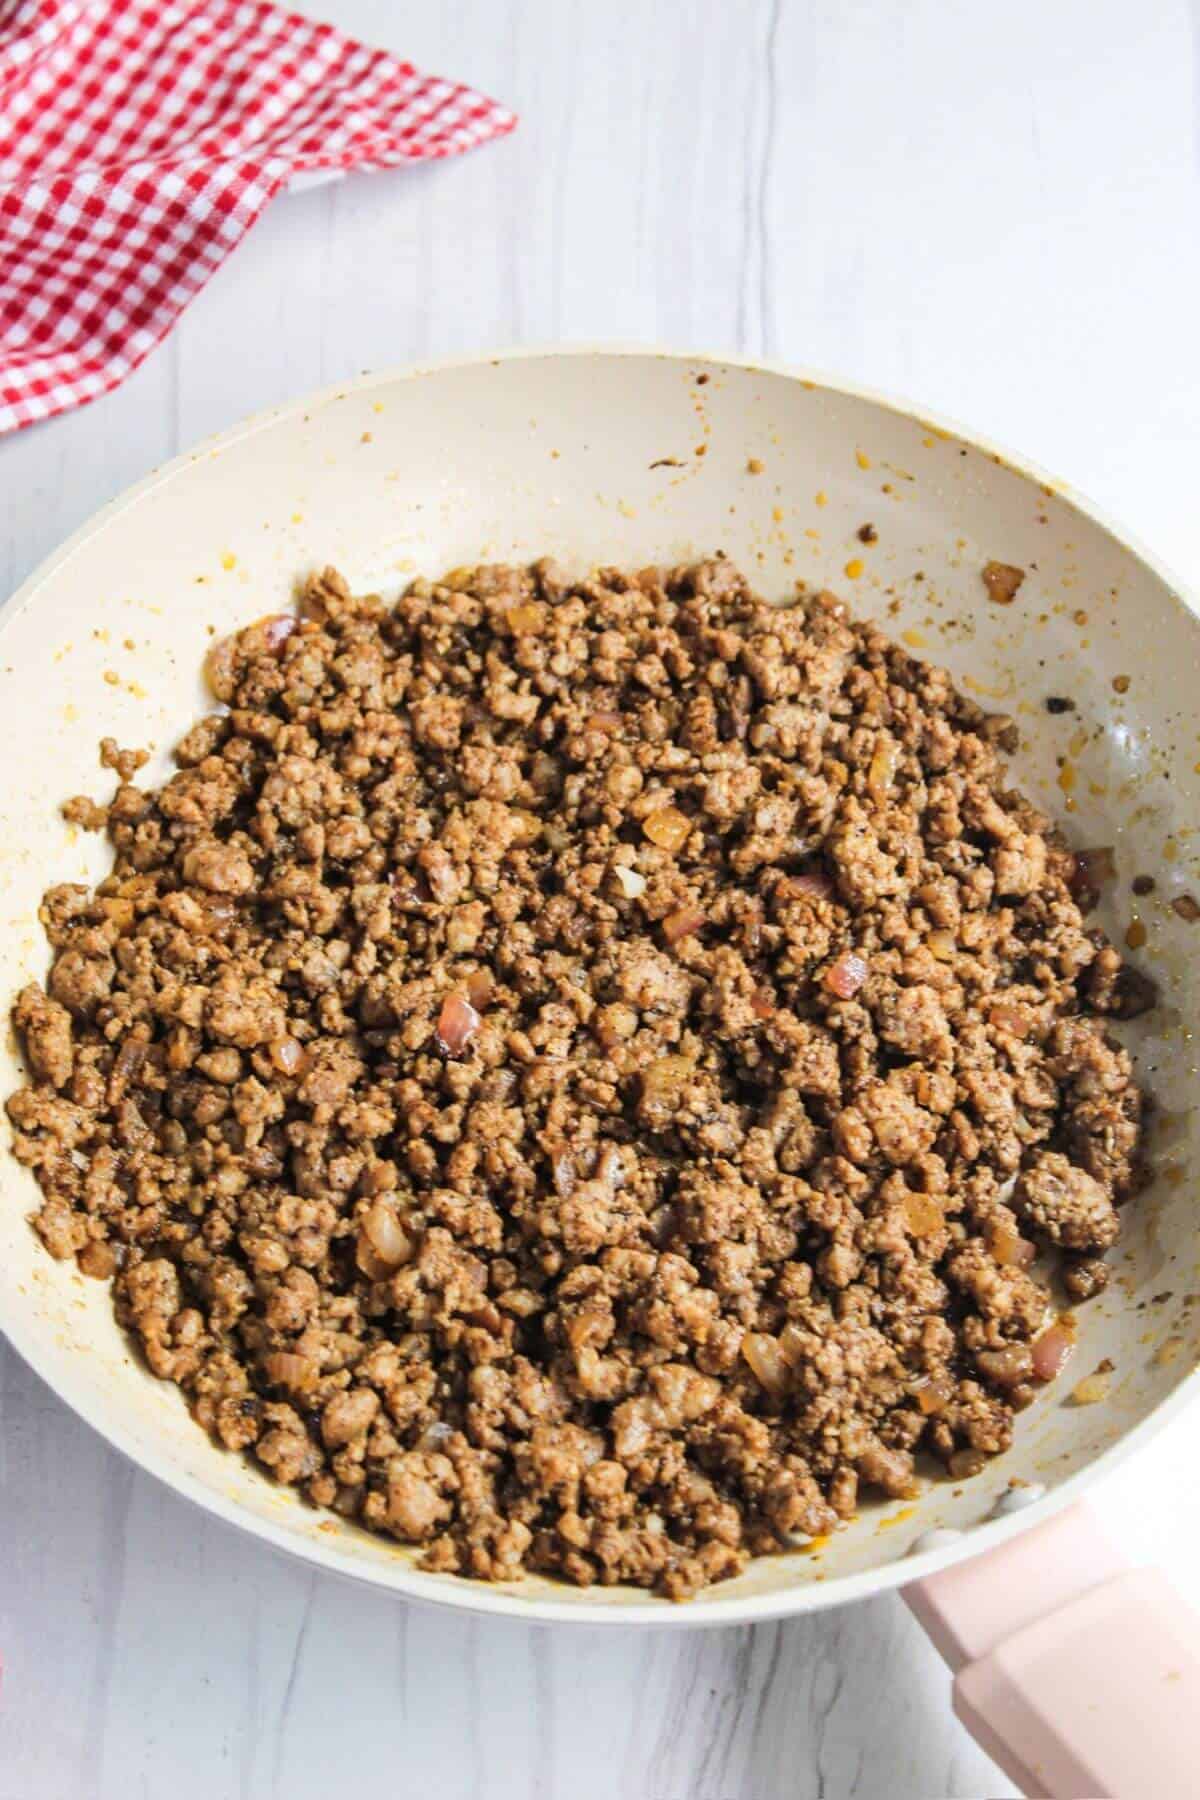 A frying pan filled with ground pork.